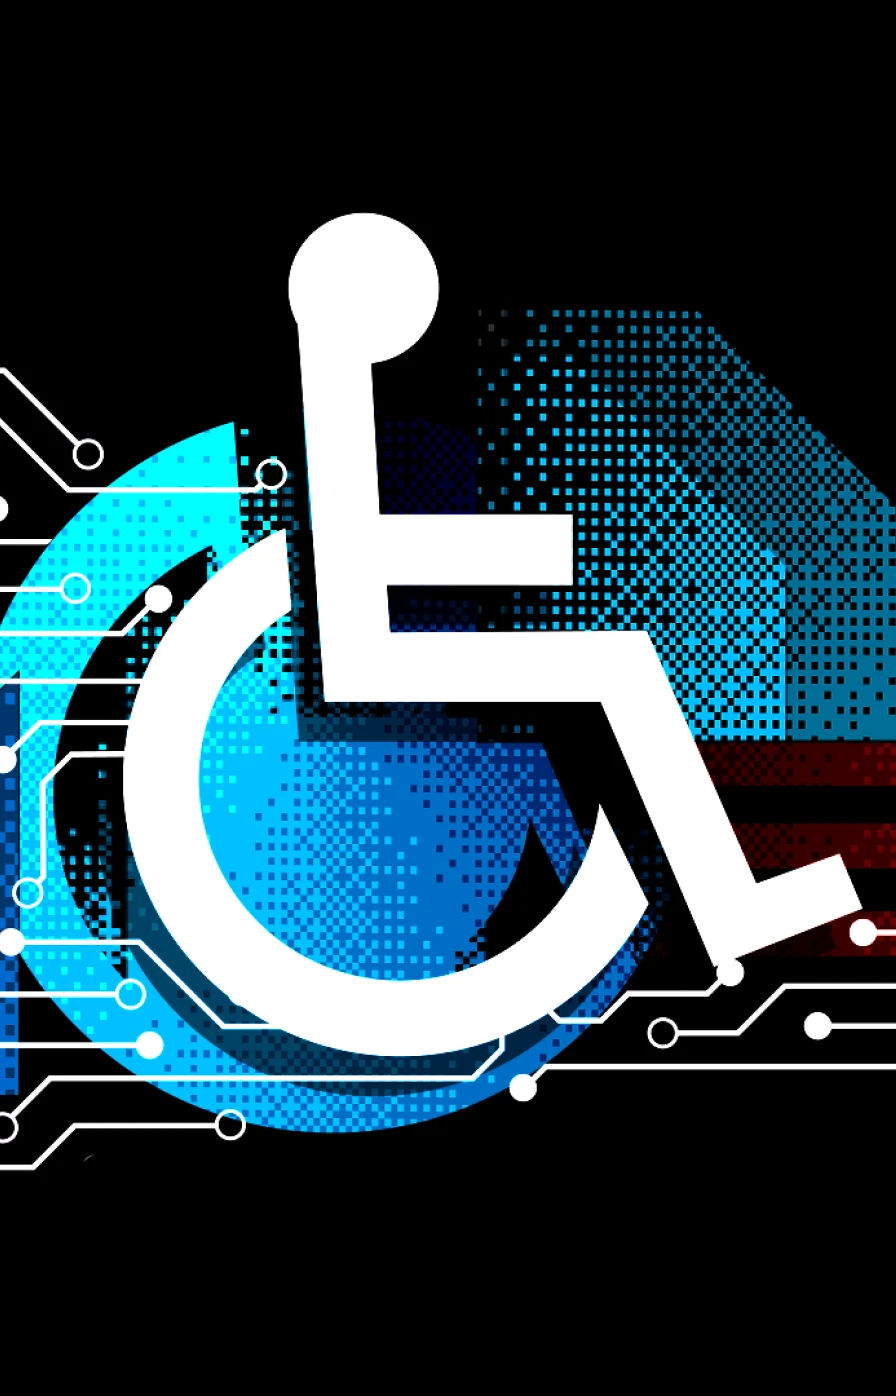 The accessibility wheelchair logo sits on top of numerous technology illustrations including a circuit board